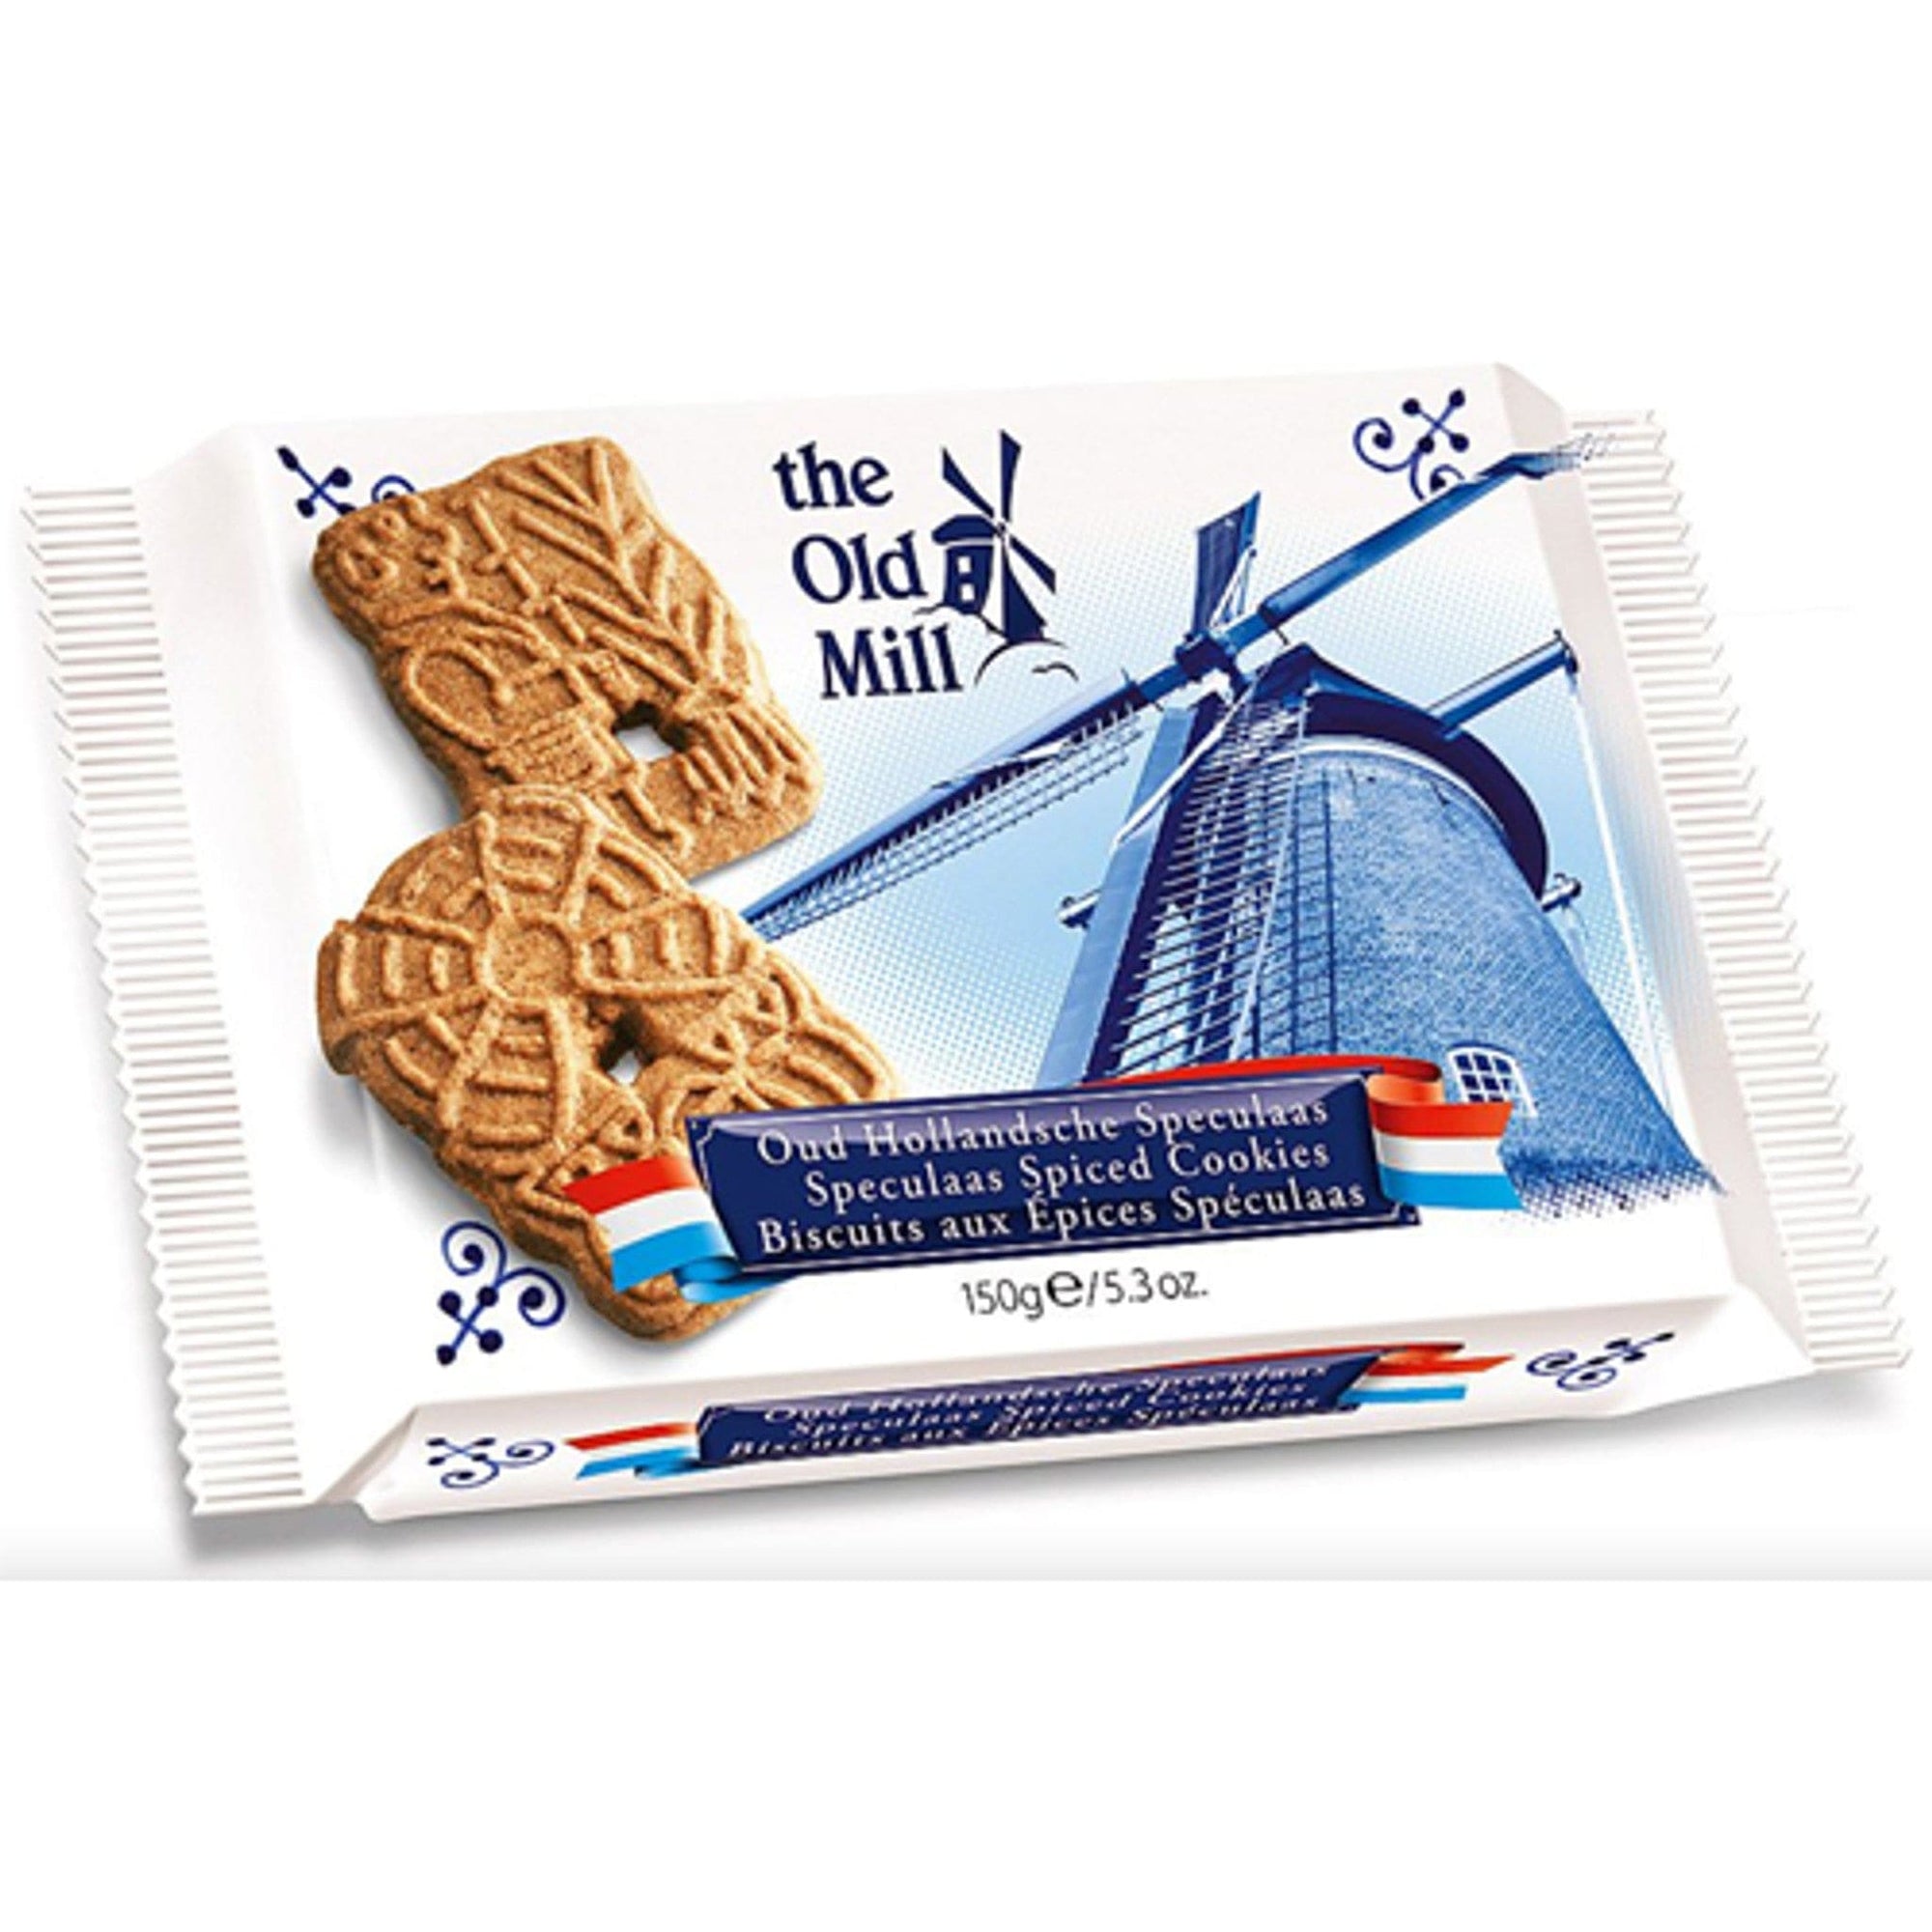 The Old Mill The Old Mill Speculaas Spiced Biscuits